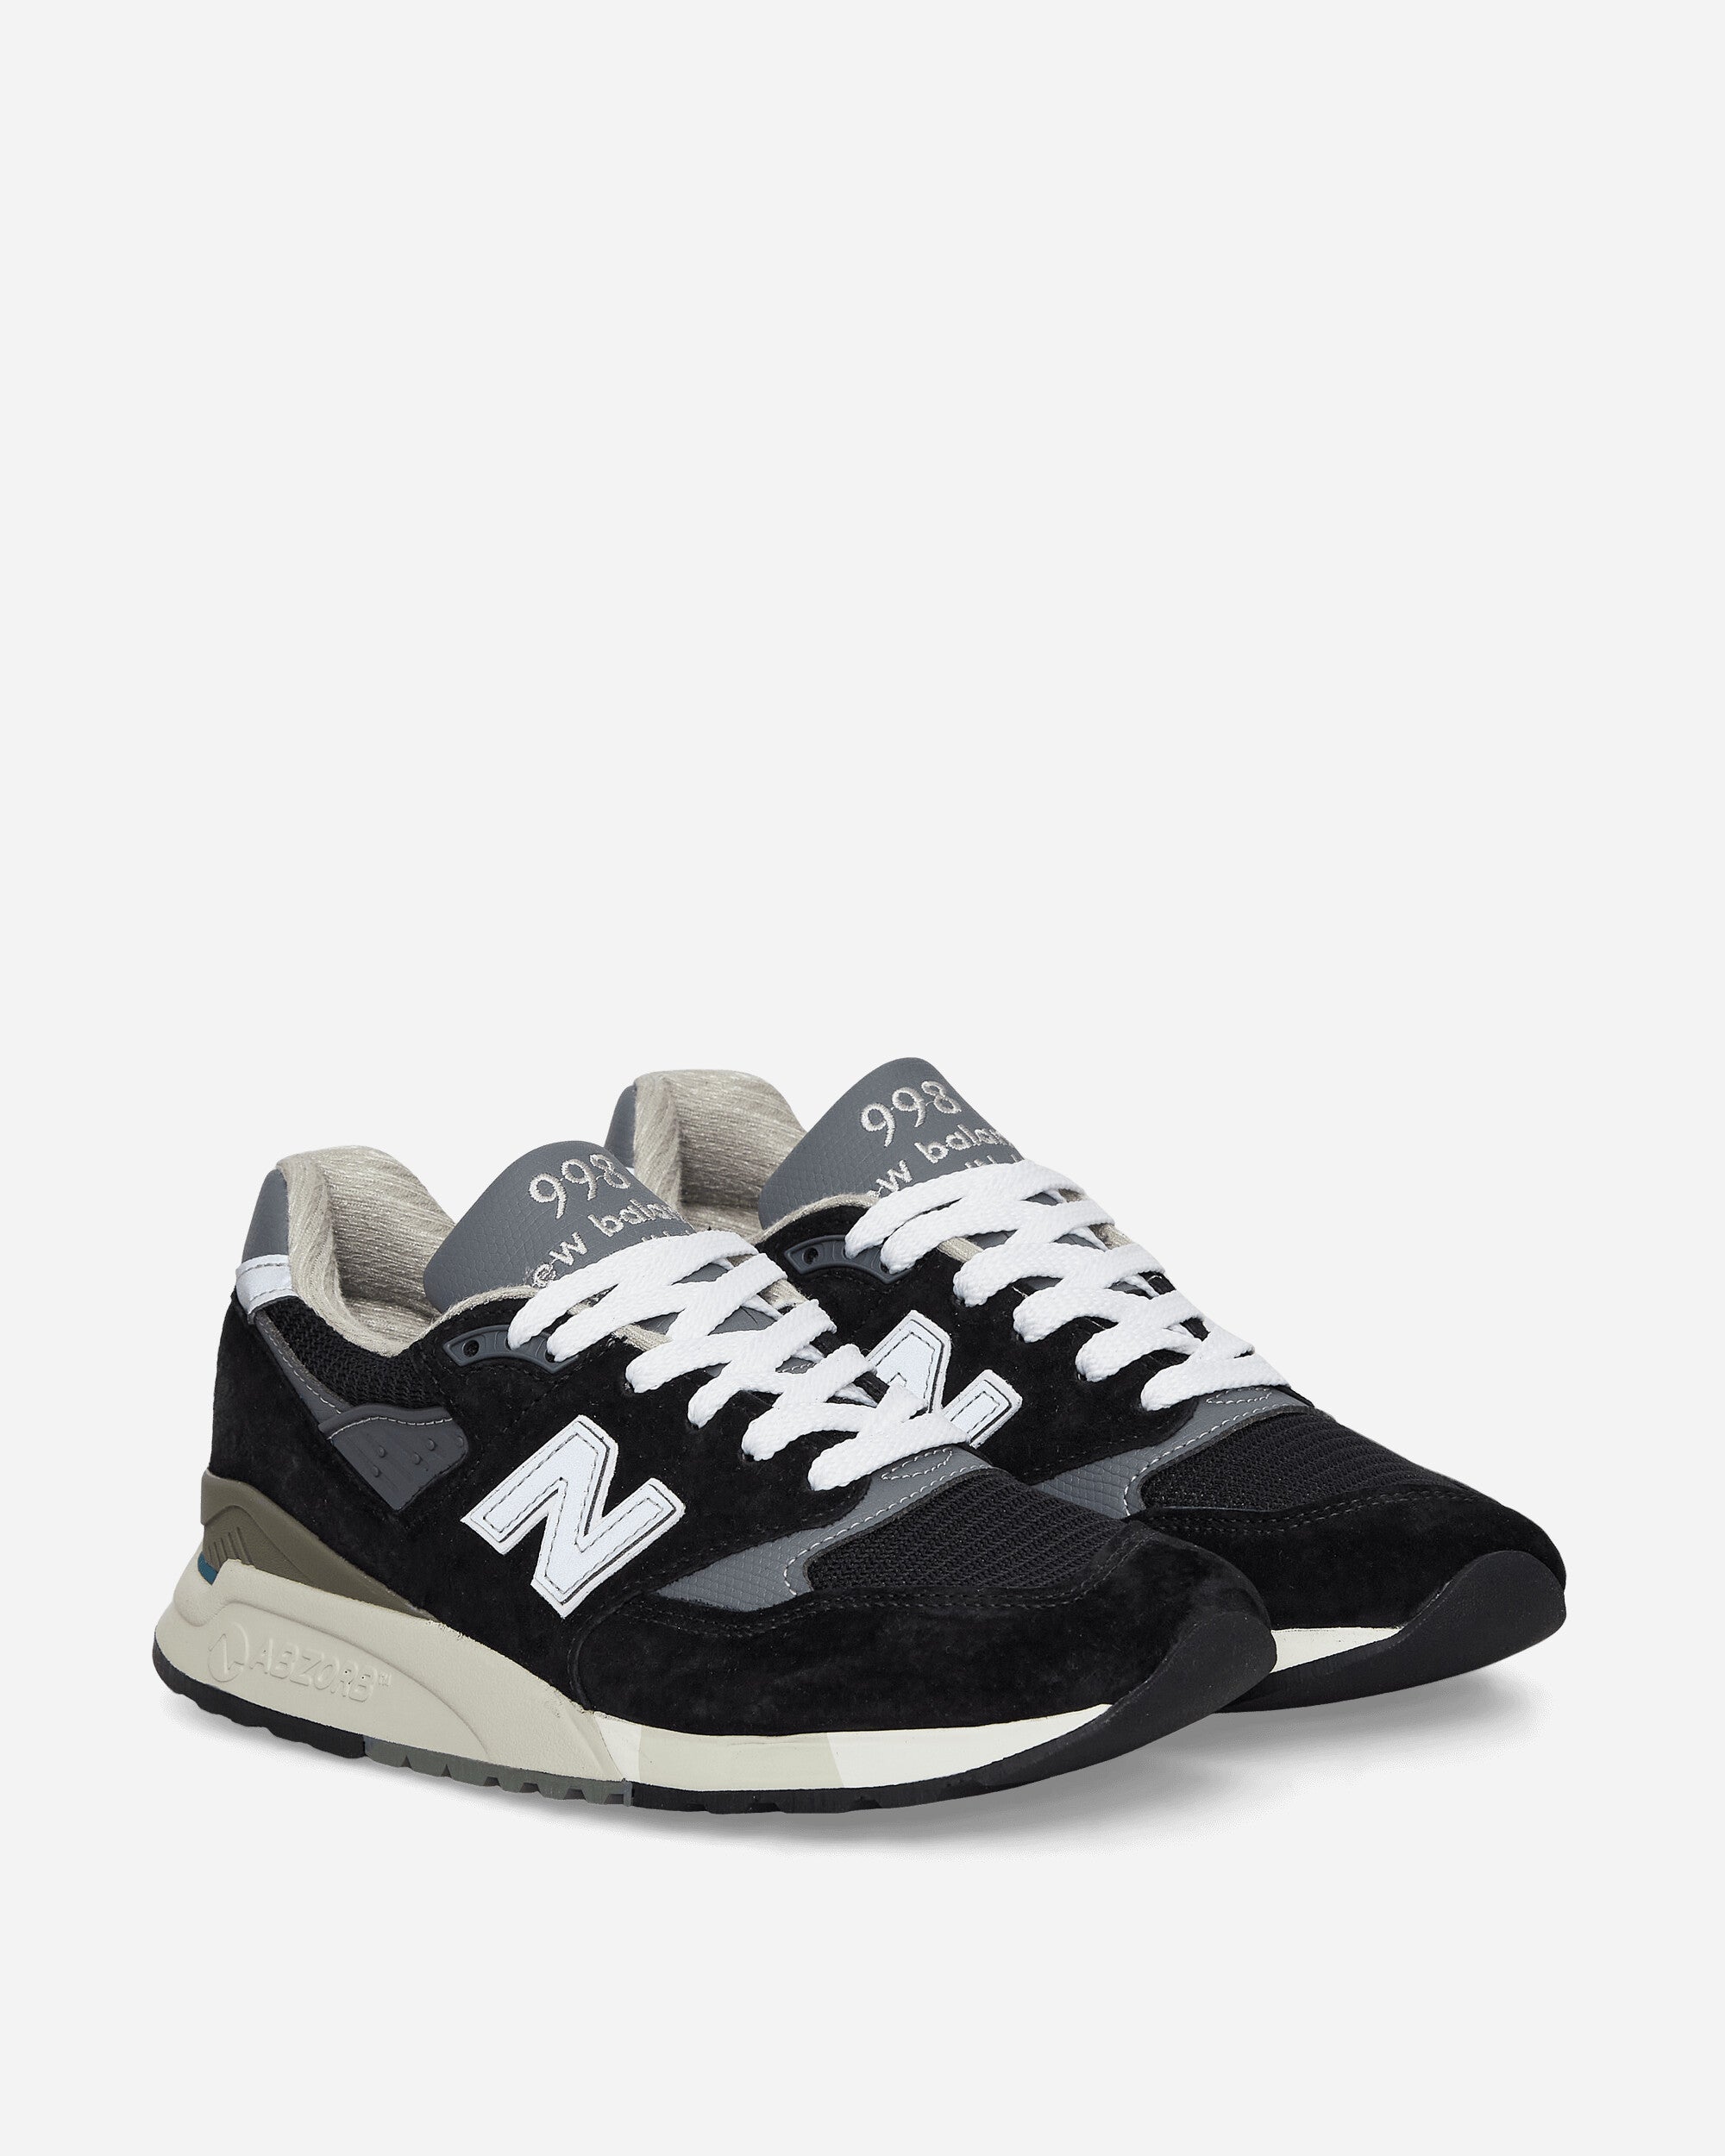 Made in USA 998 Sneakers Black / Silver